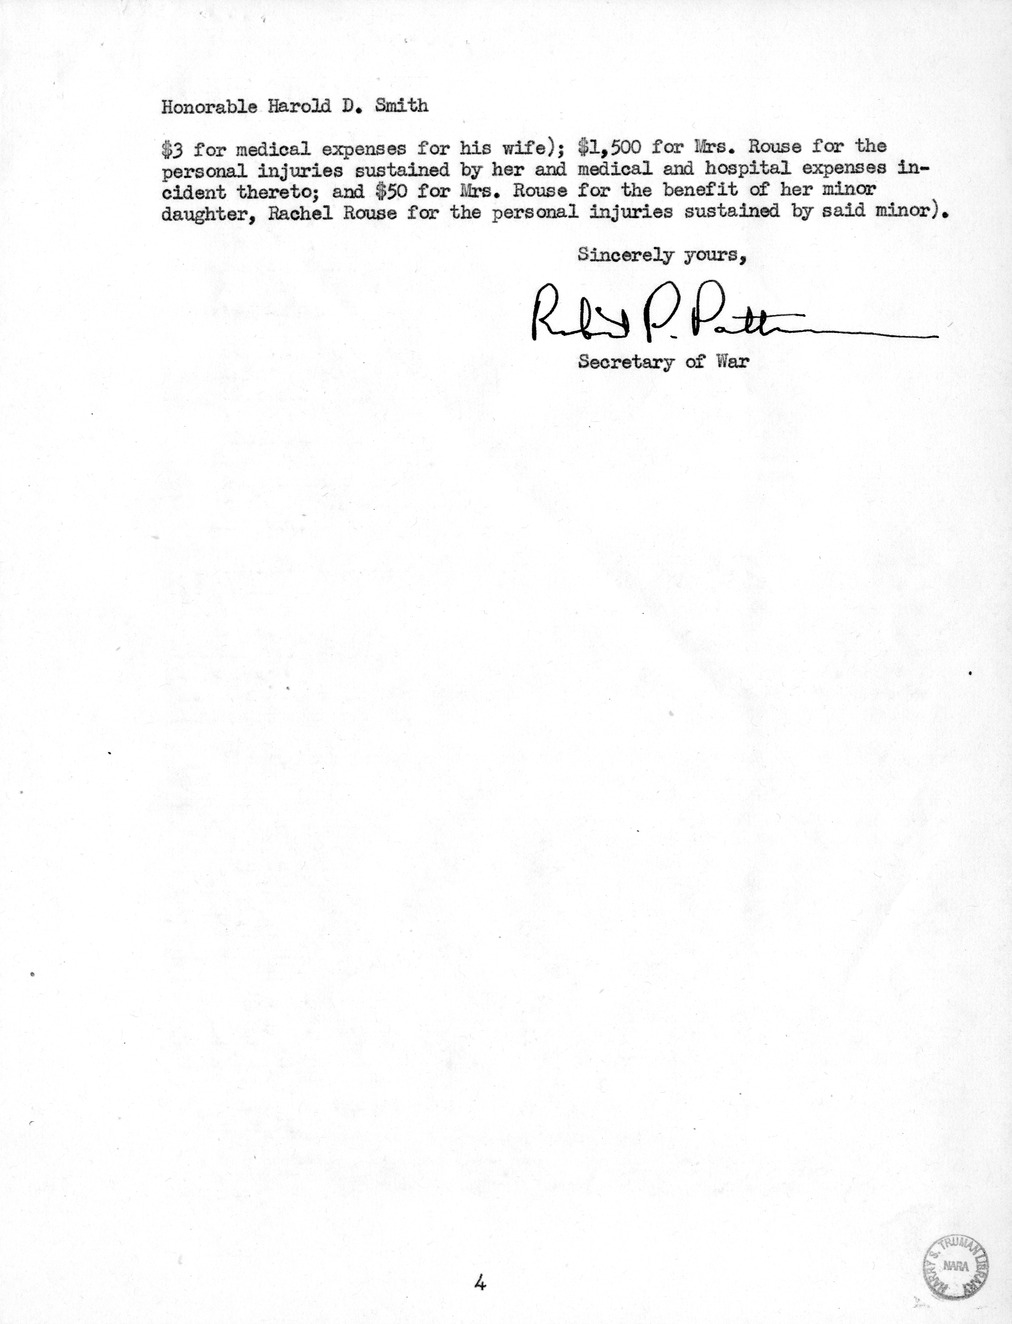 Memorandum from Frederick J. Bailey to M. C. Latta, S. 1017, For the Relief of Charlie B. Rouse and Mrs. Louette Rouse, with Attachments